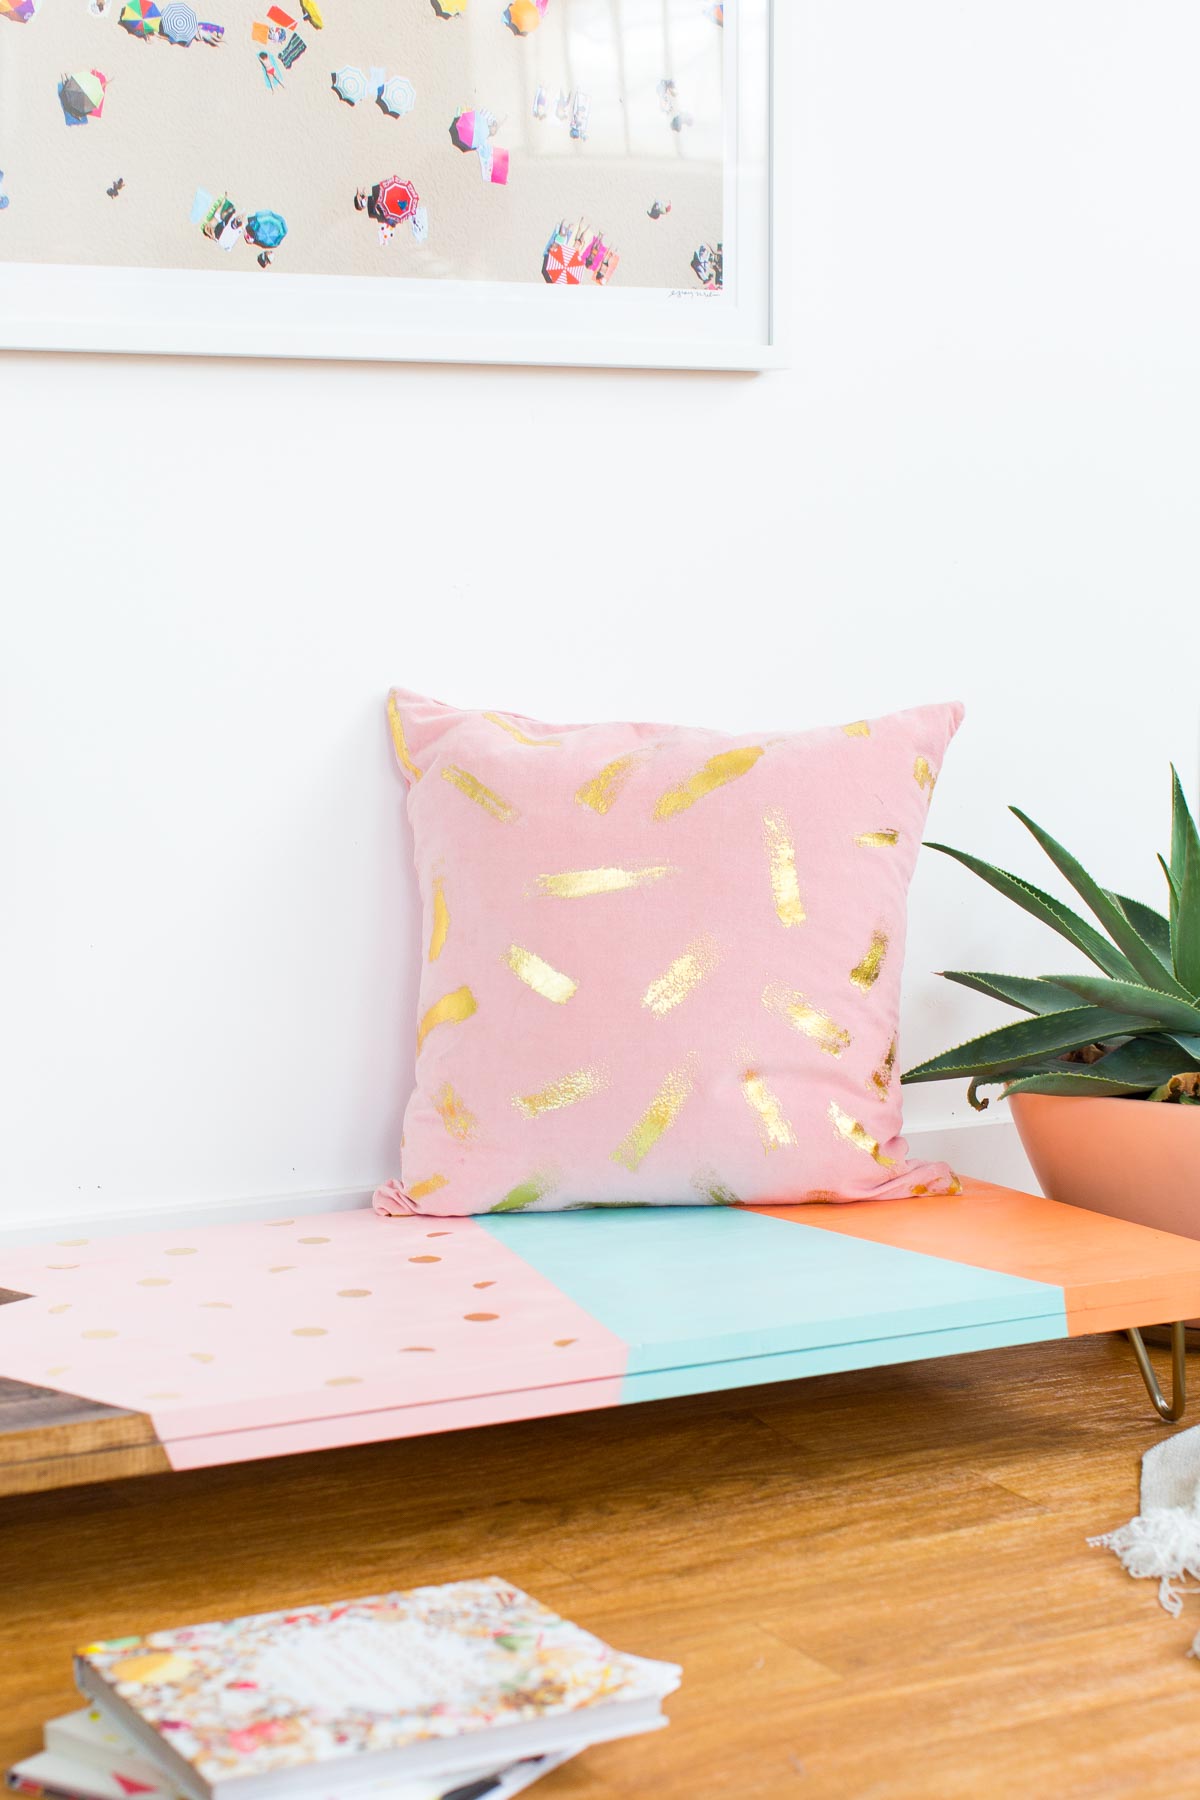 DIY Modern Low Bench with pillow